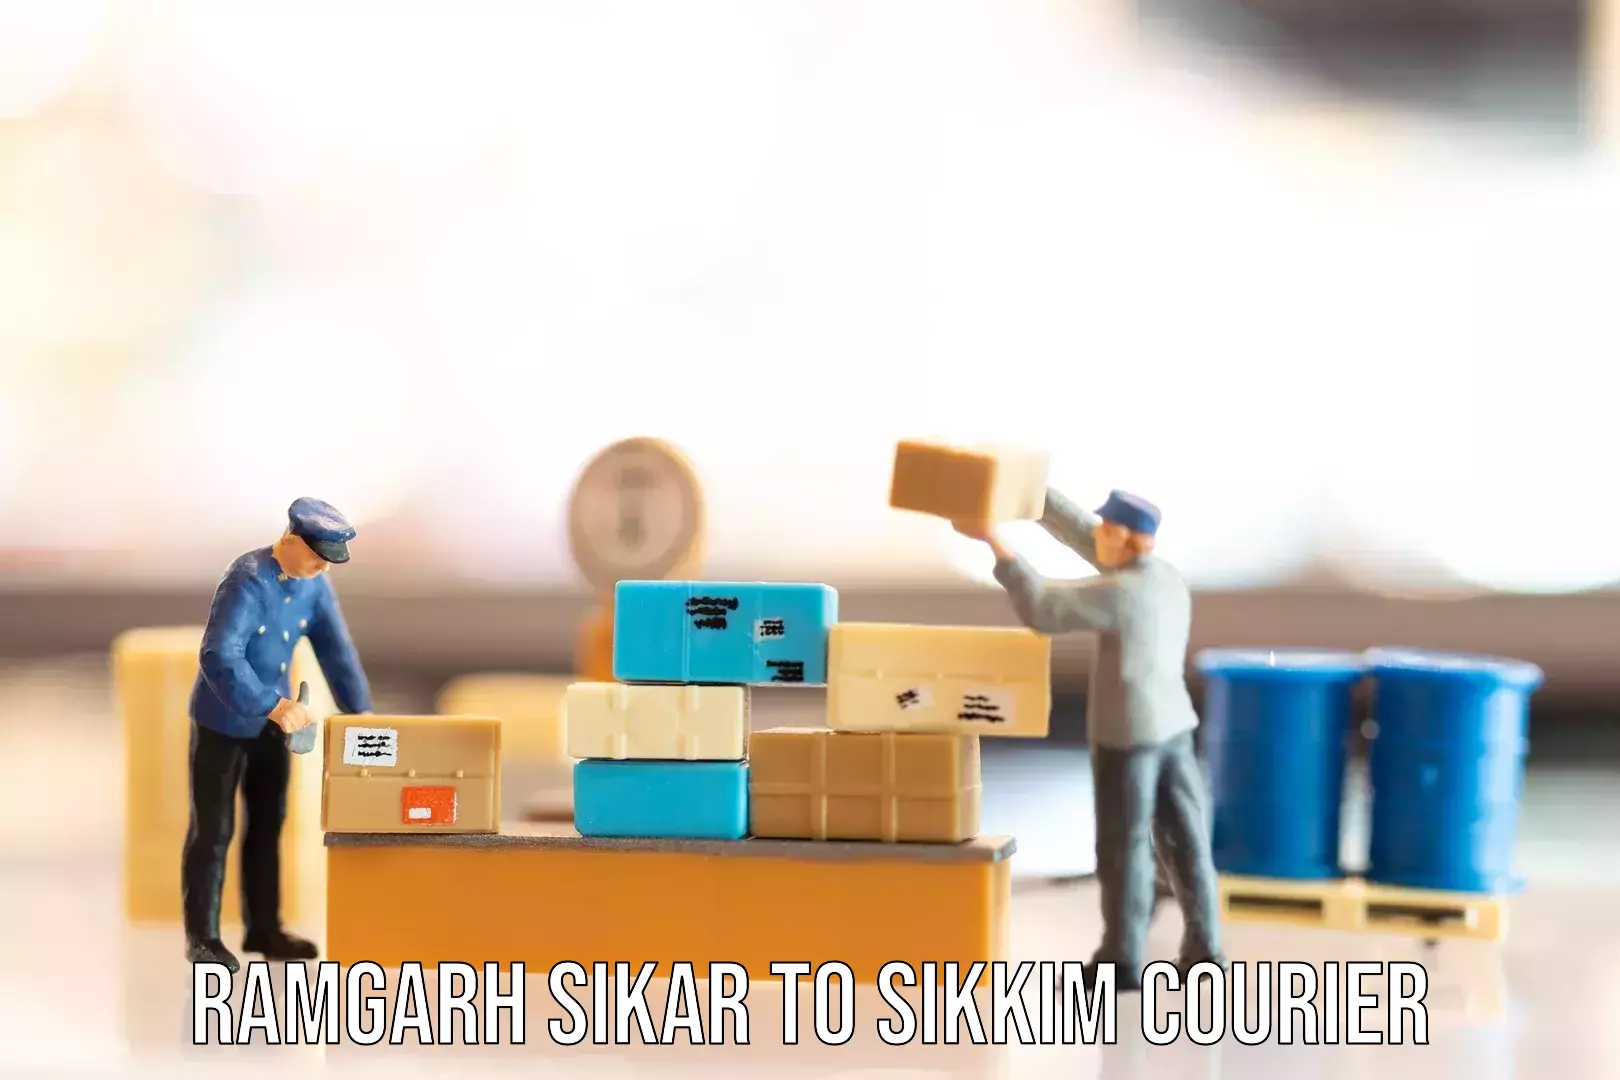 Online luggage shipping booking Ramgarh Sikar to Sikkim